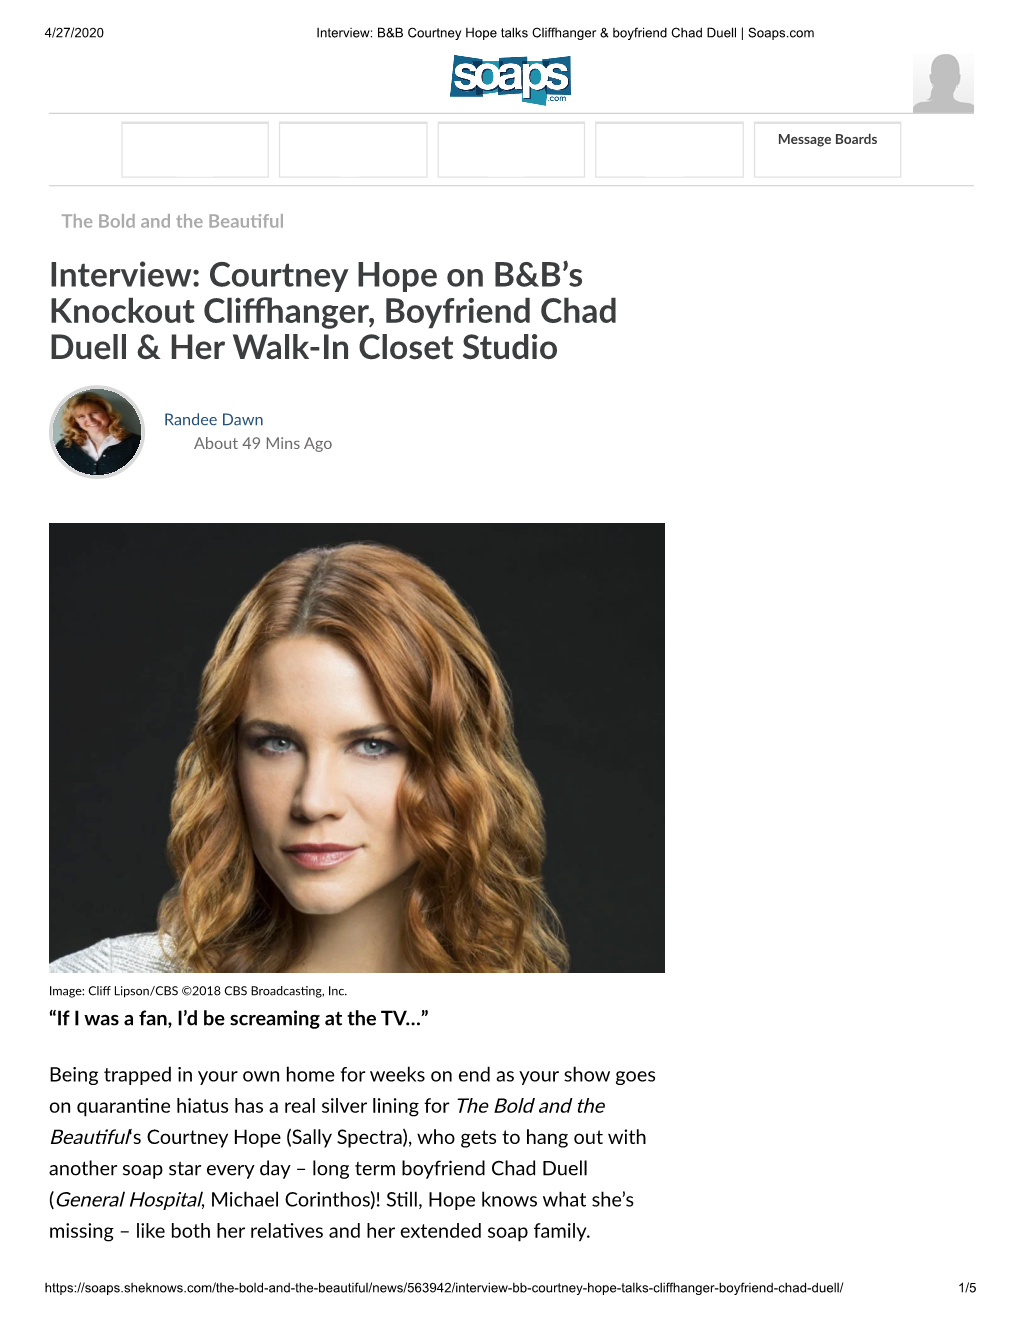 Interview: Courtney Hope on B&B's Knockout Cli Anger, Boyfriend Chad